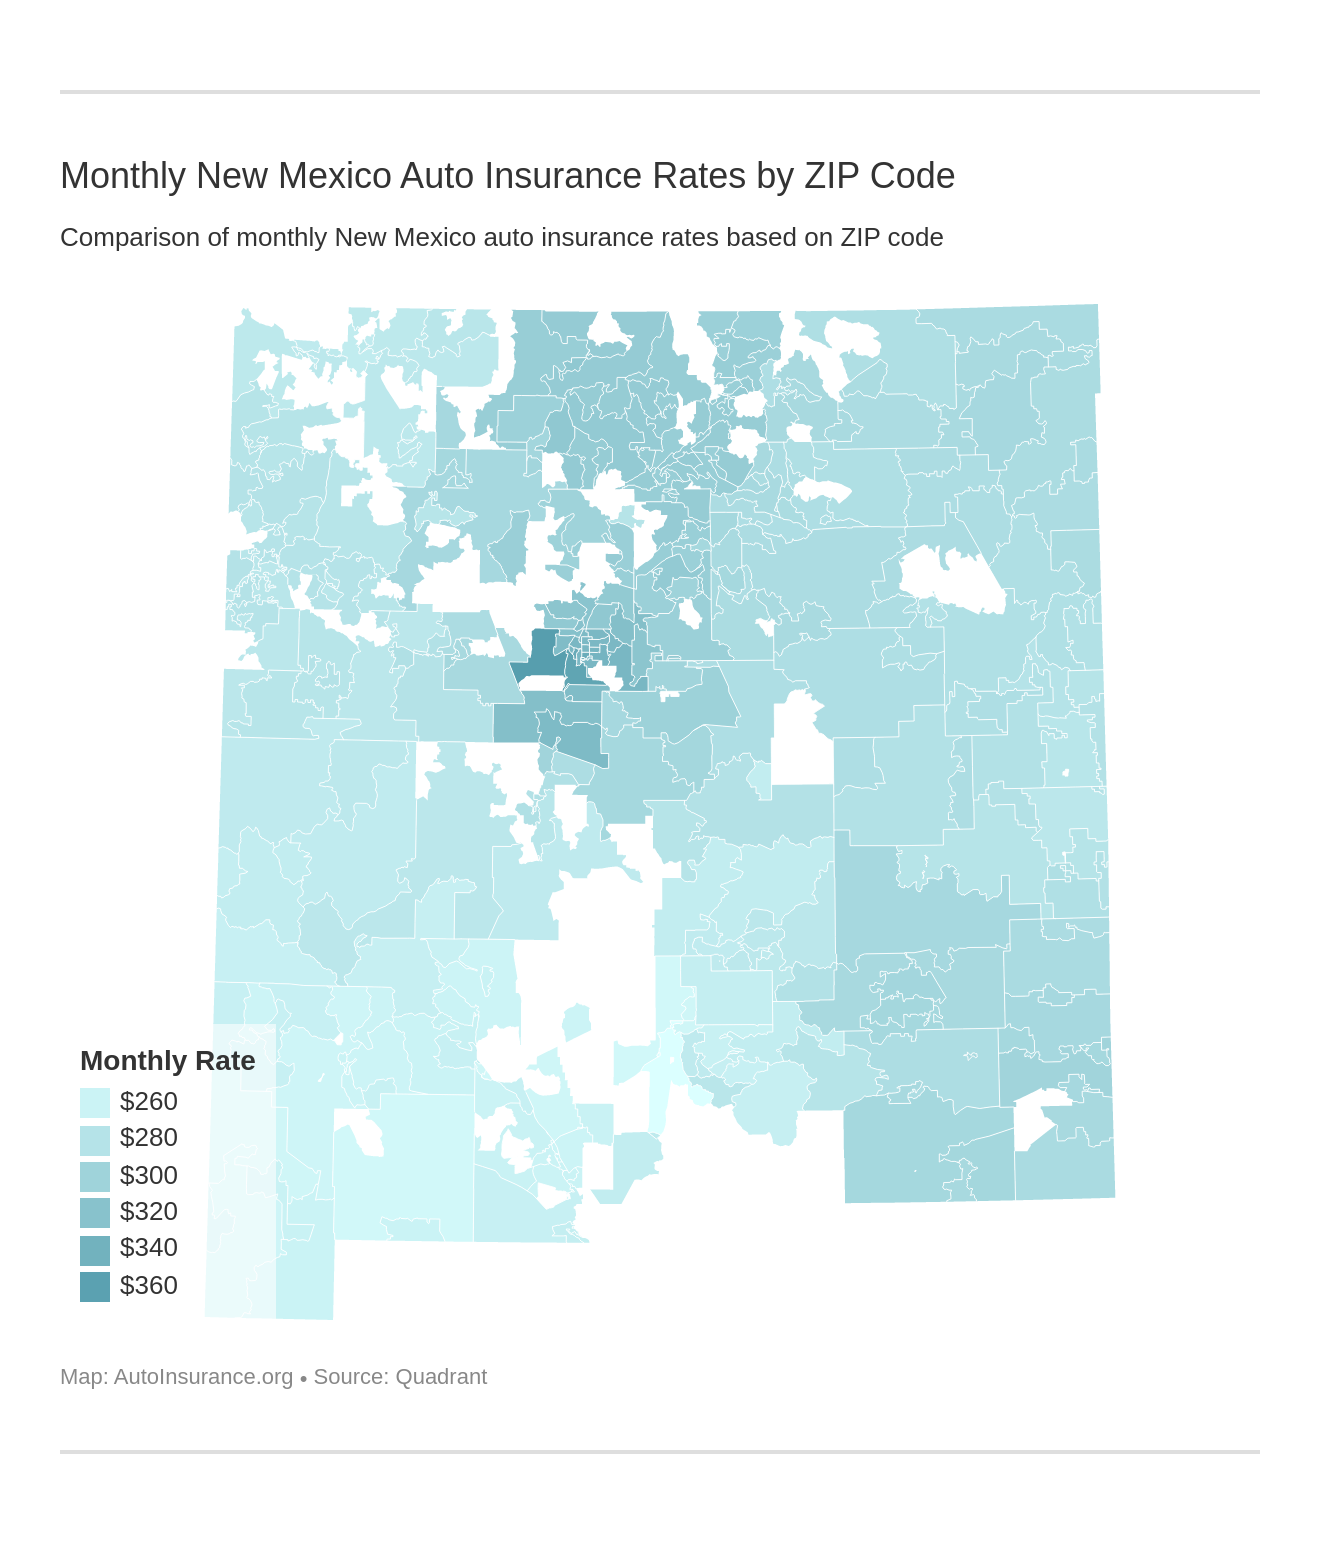 Monthly New Mexico Auto Insurance Rates by ZIP Code